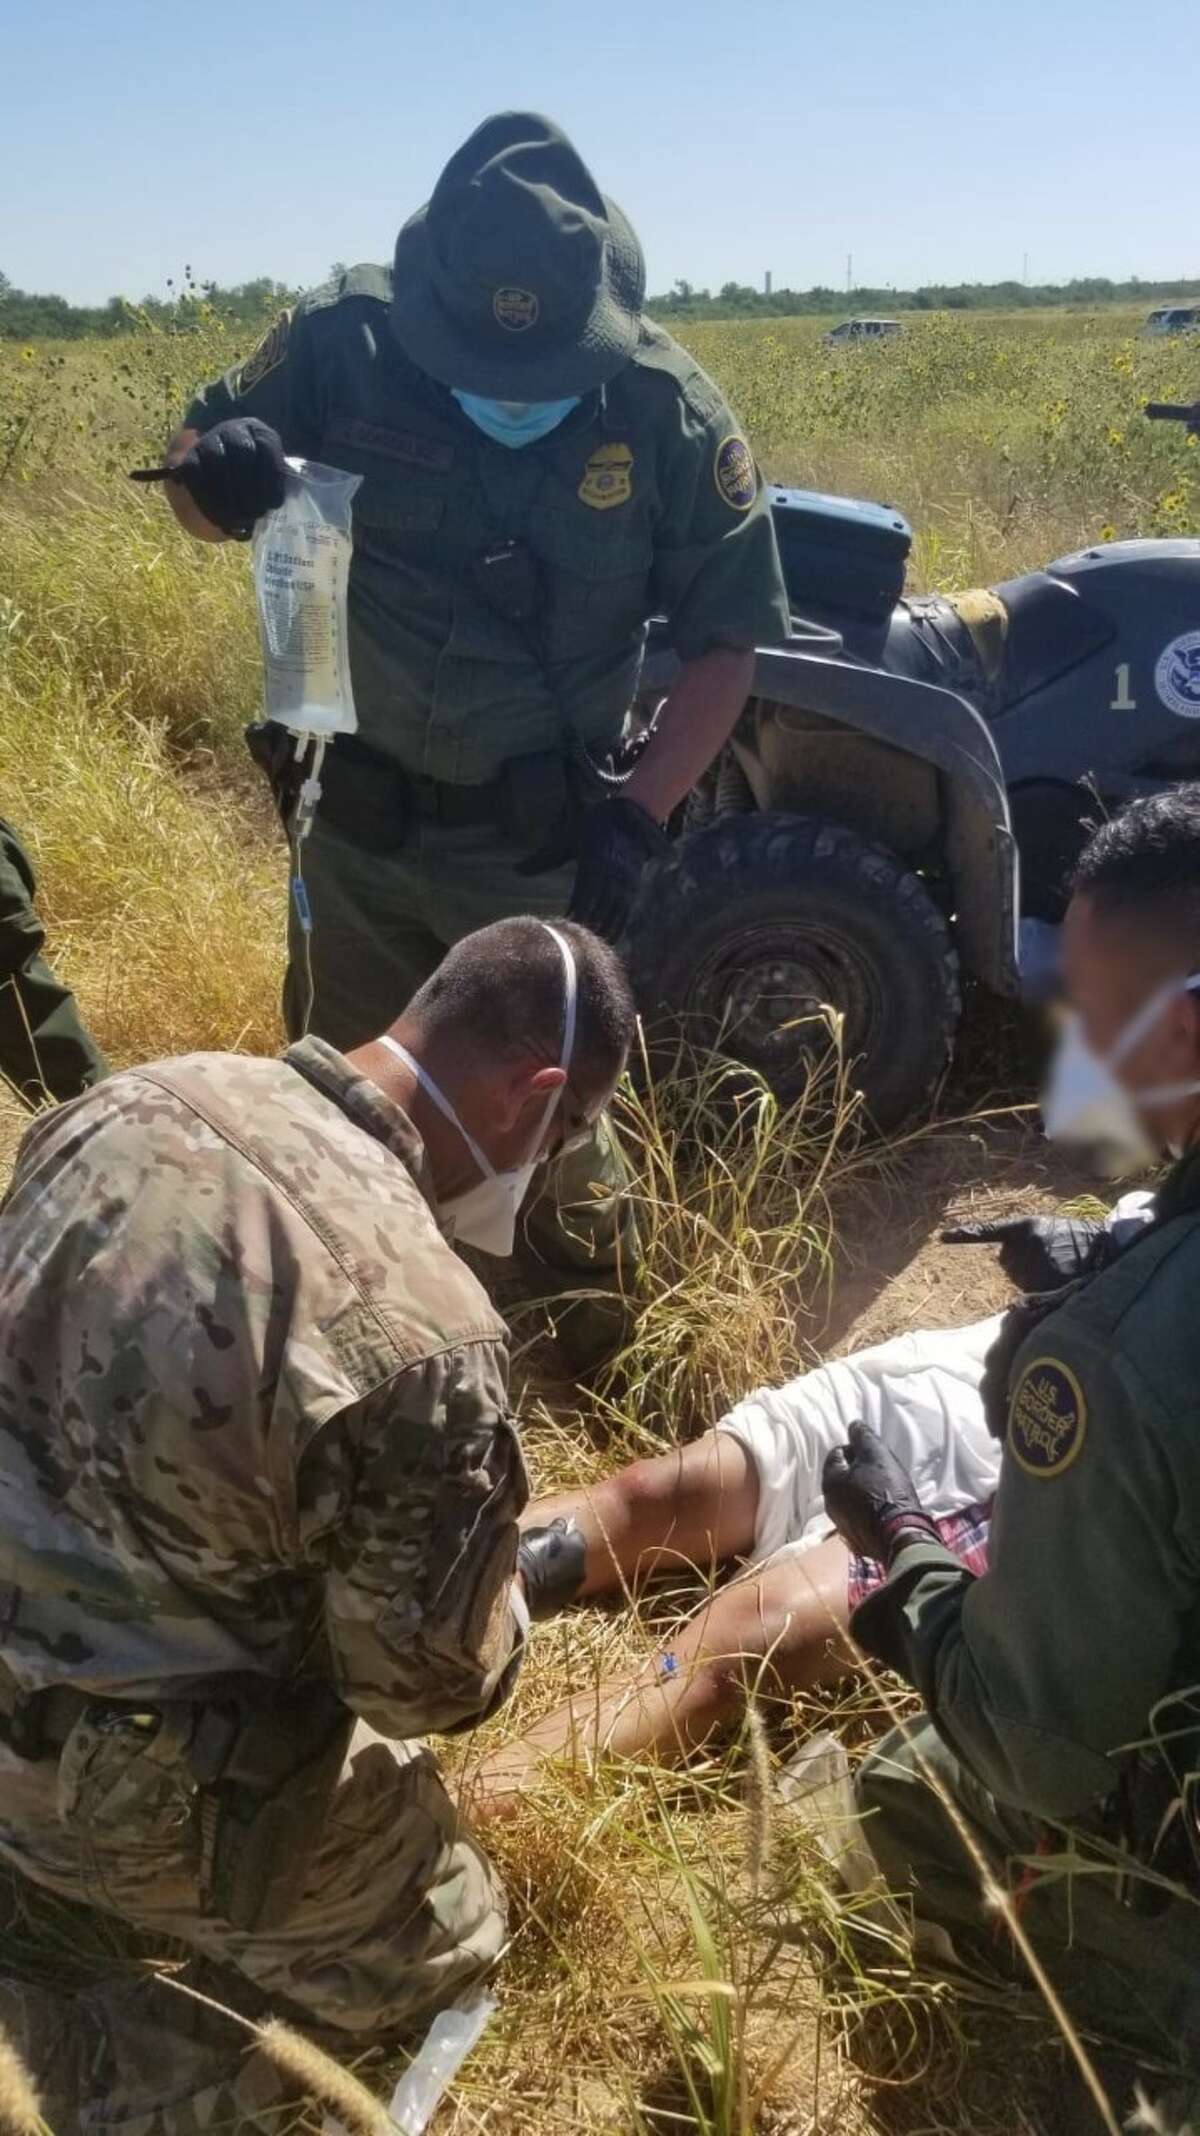 U.S. Border Patrol agents rendered life-saving aid to two juveniles who had crossed the border illegally